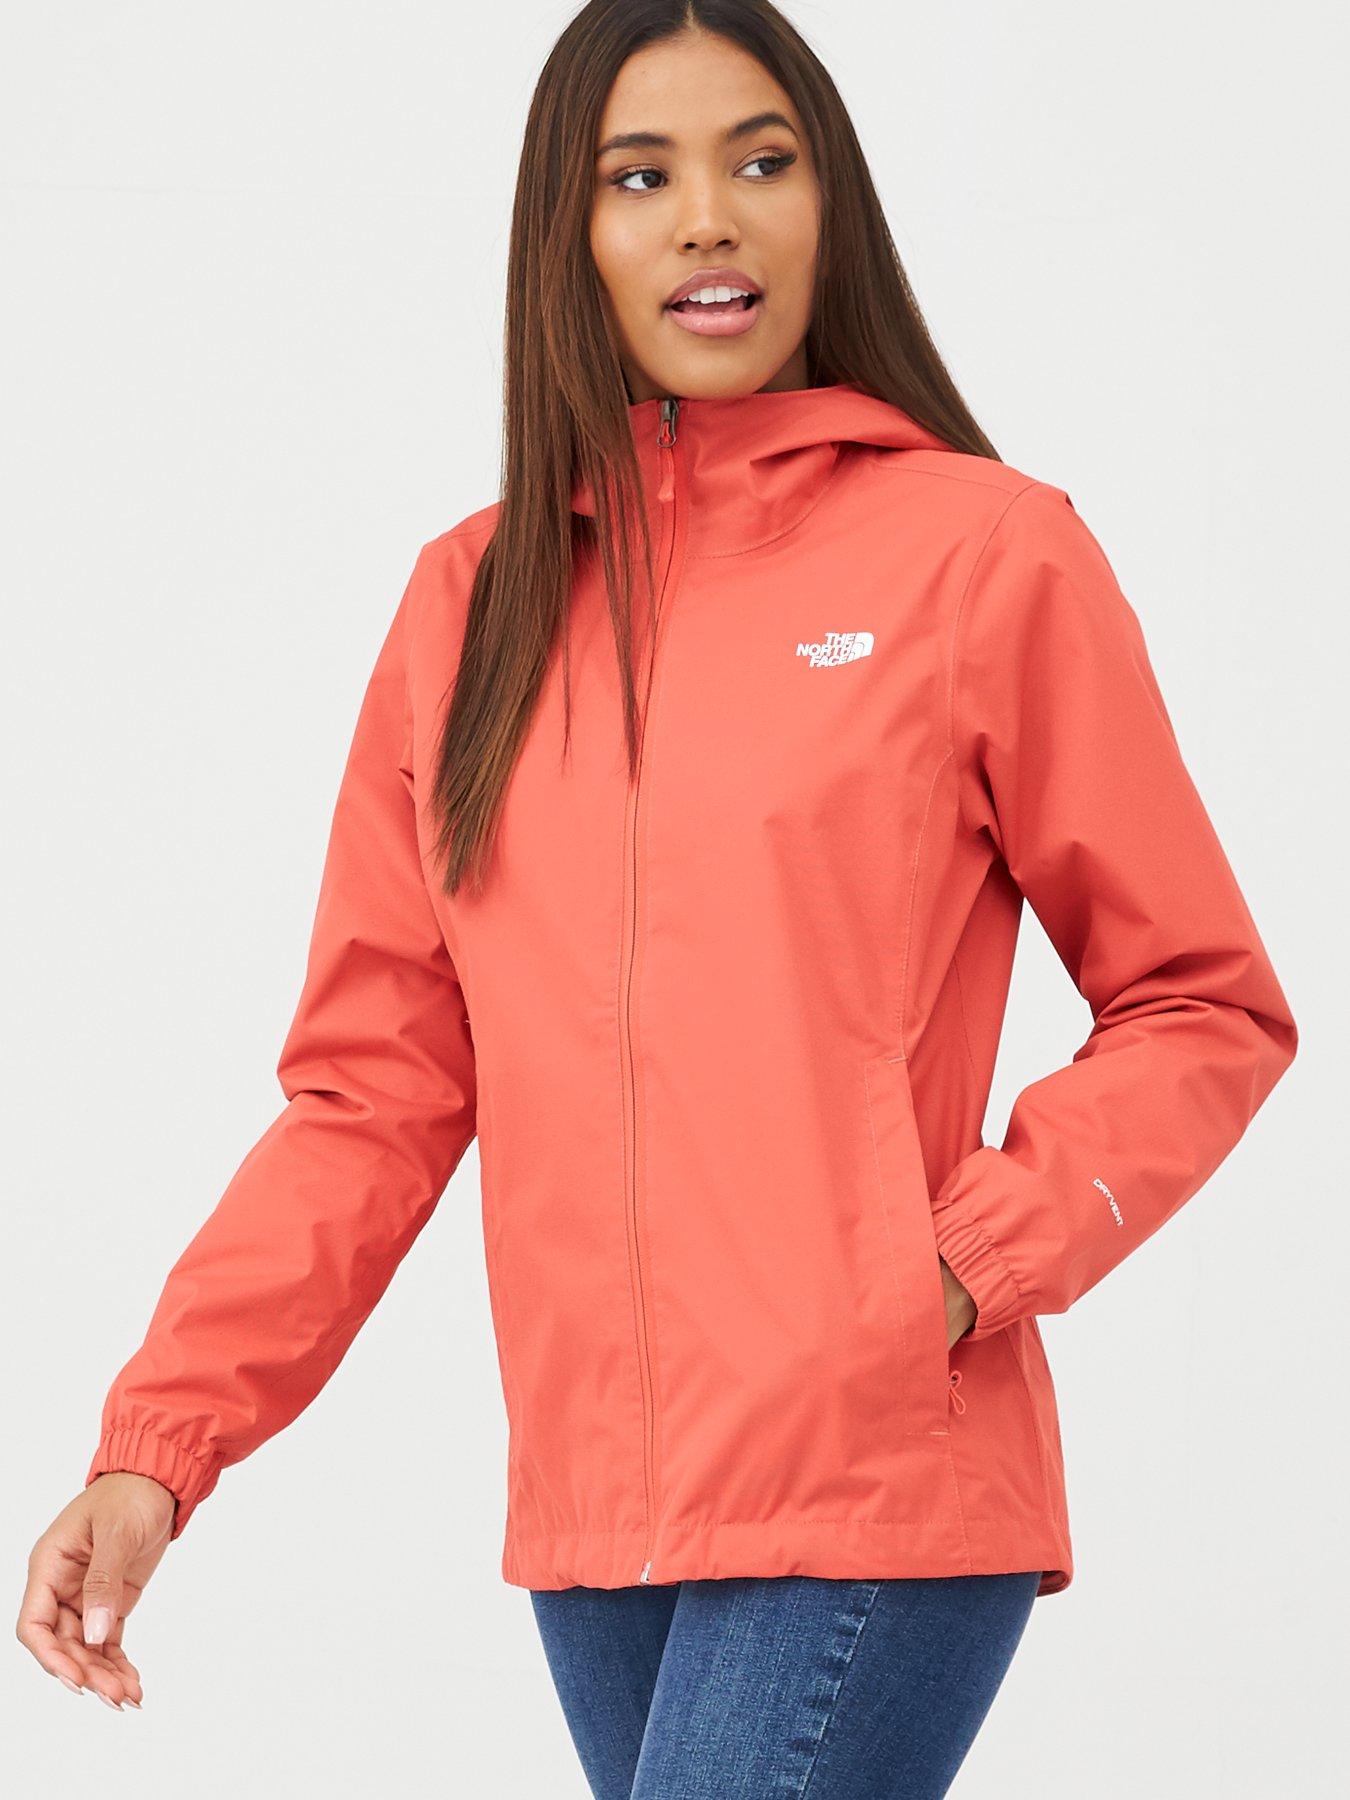 north face jacket very